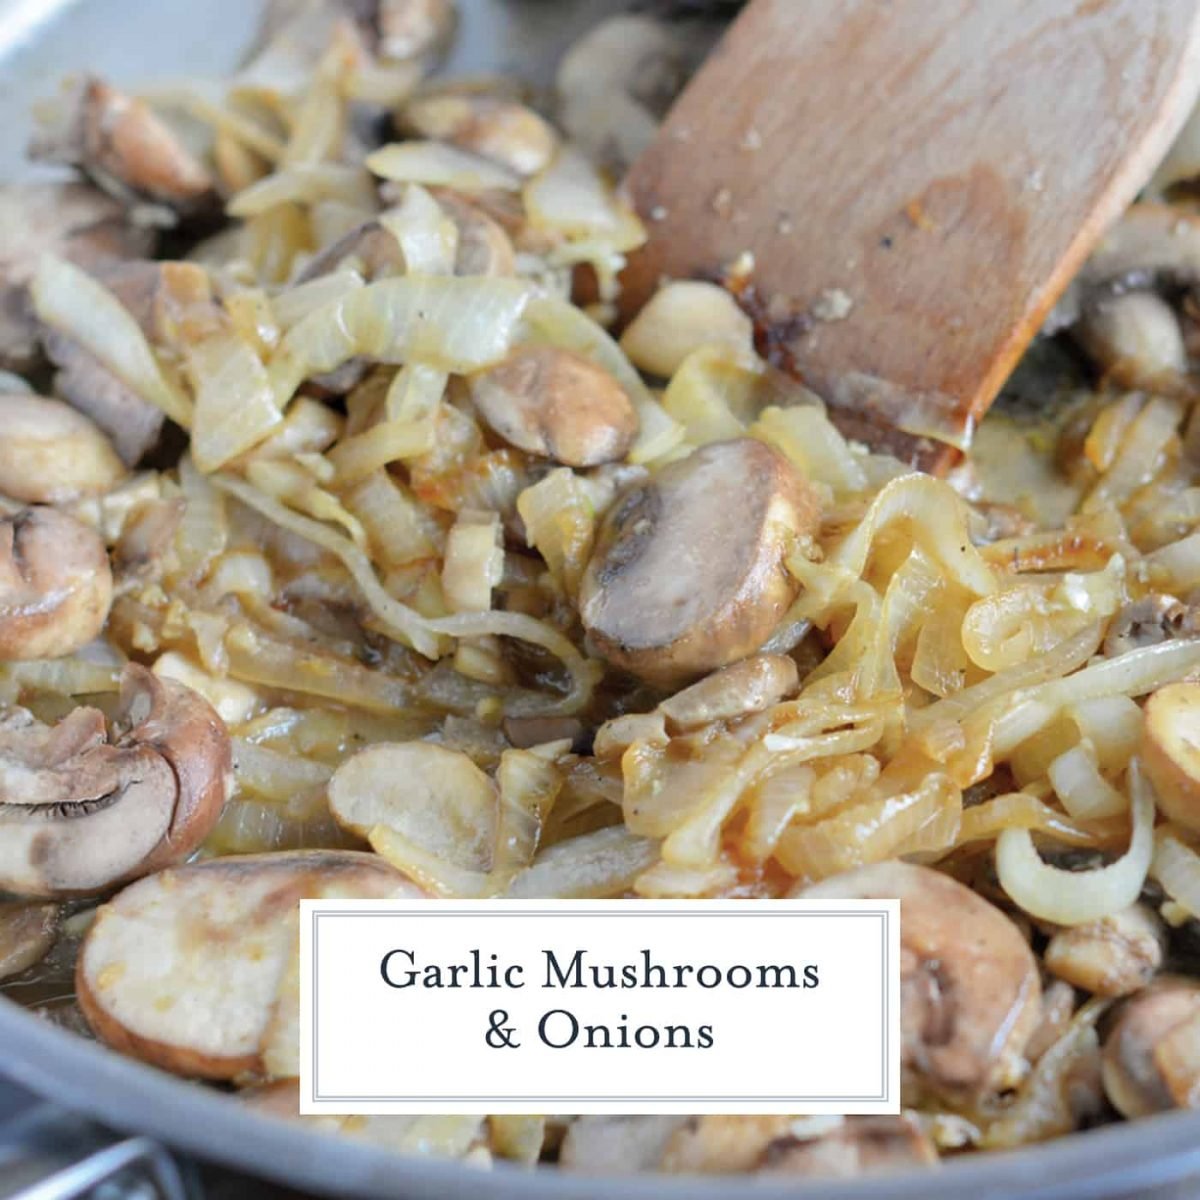 Garlic Mushrooms and Onions are a tasty side dish for any meal. Mushrooms and onions sauteed with fresh garlic and maitre d'hotel butter. #garlicmushrooms #easysidedishes www.savoryexperiments.com